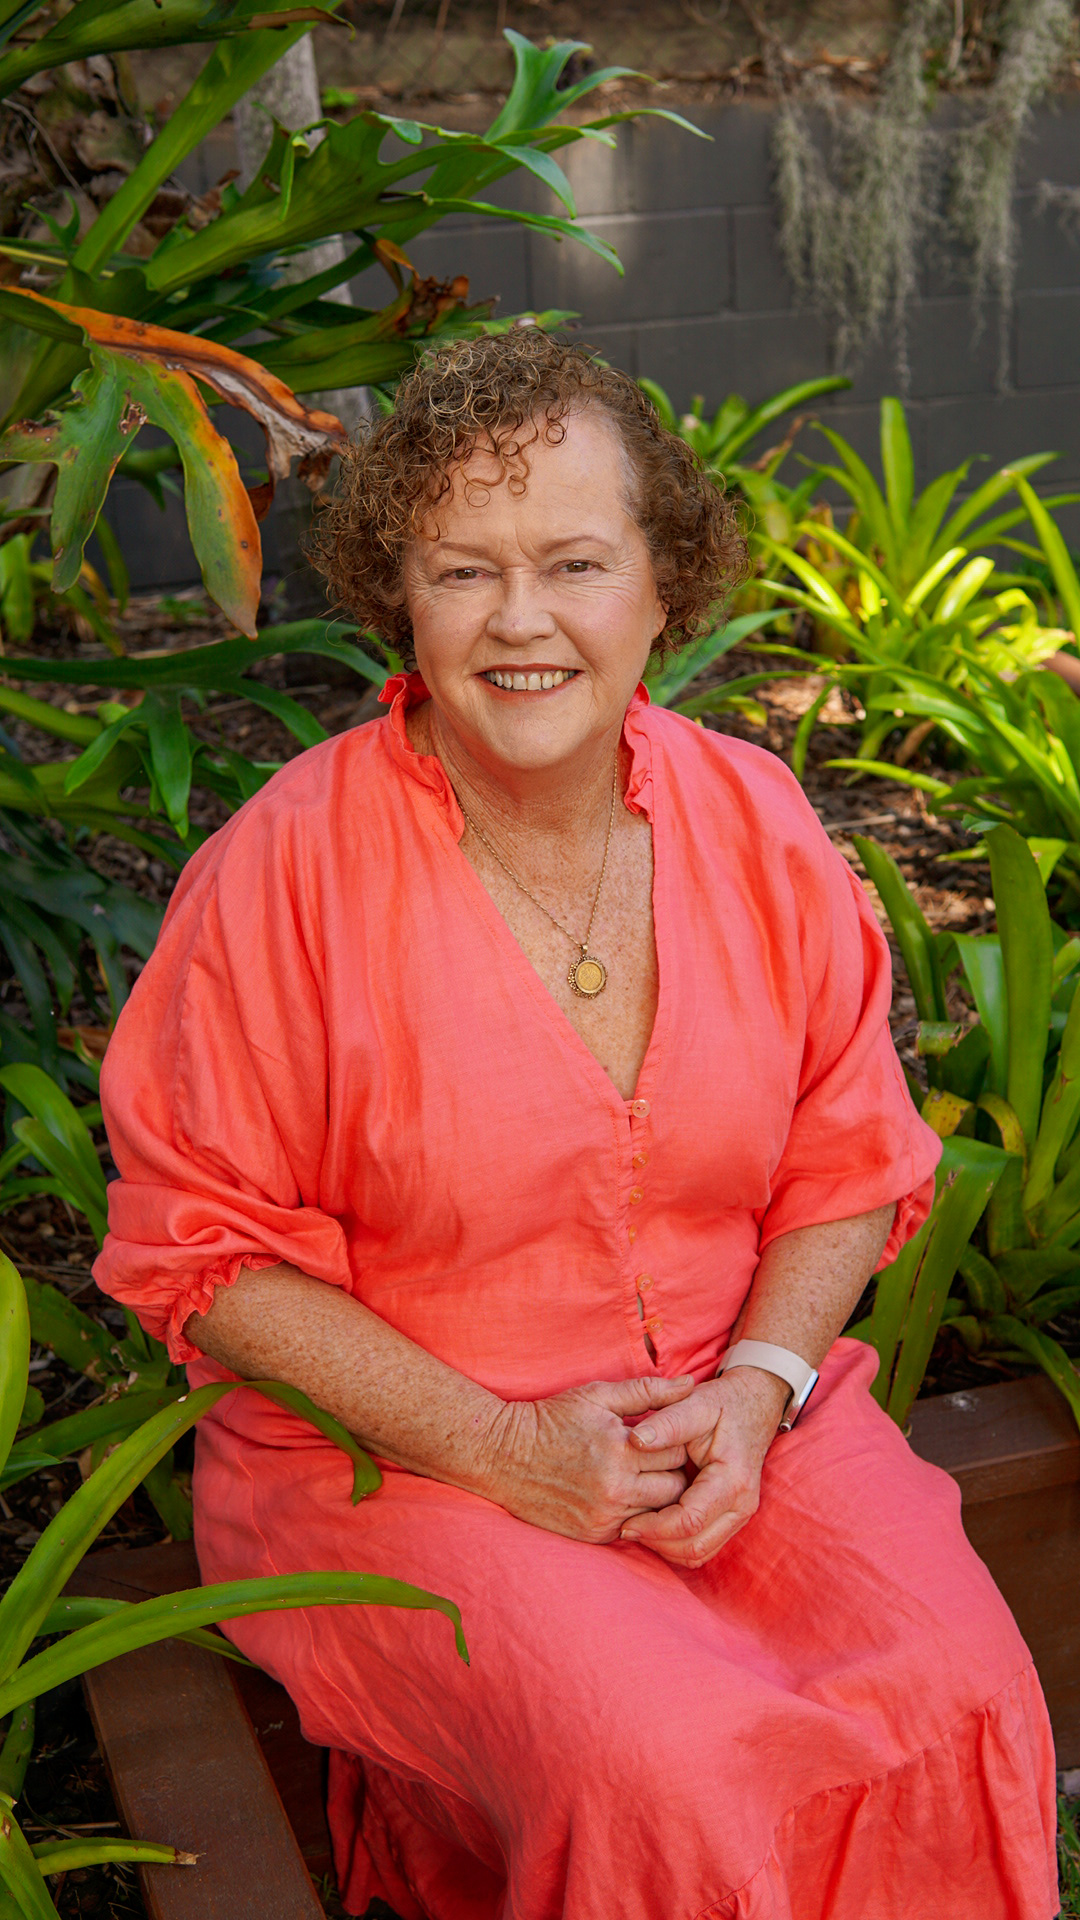 Queensland event manager Wendy Lacey